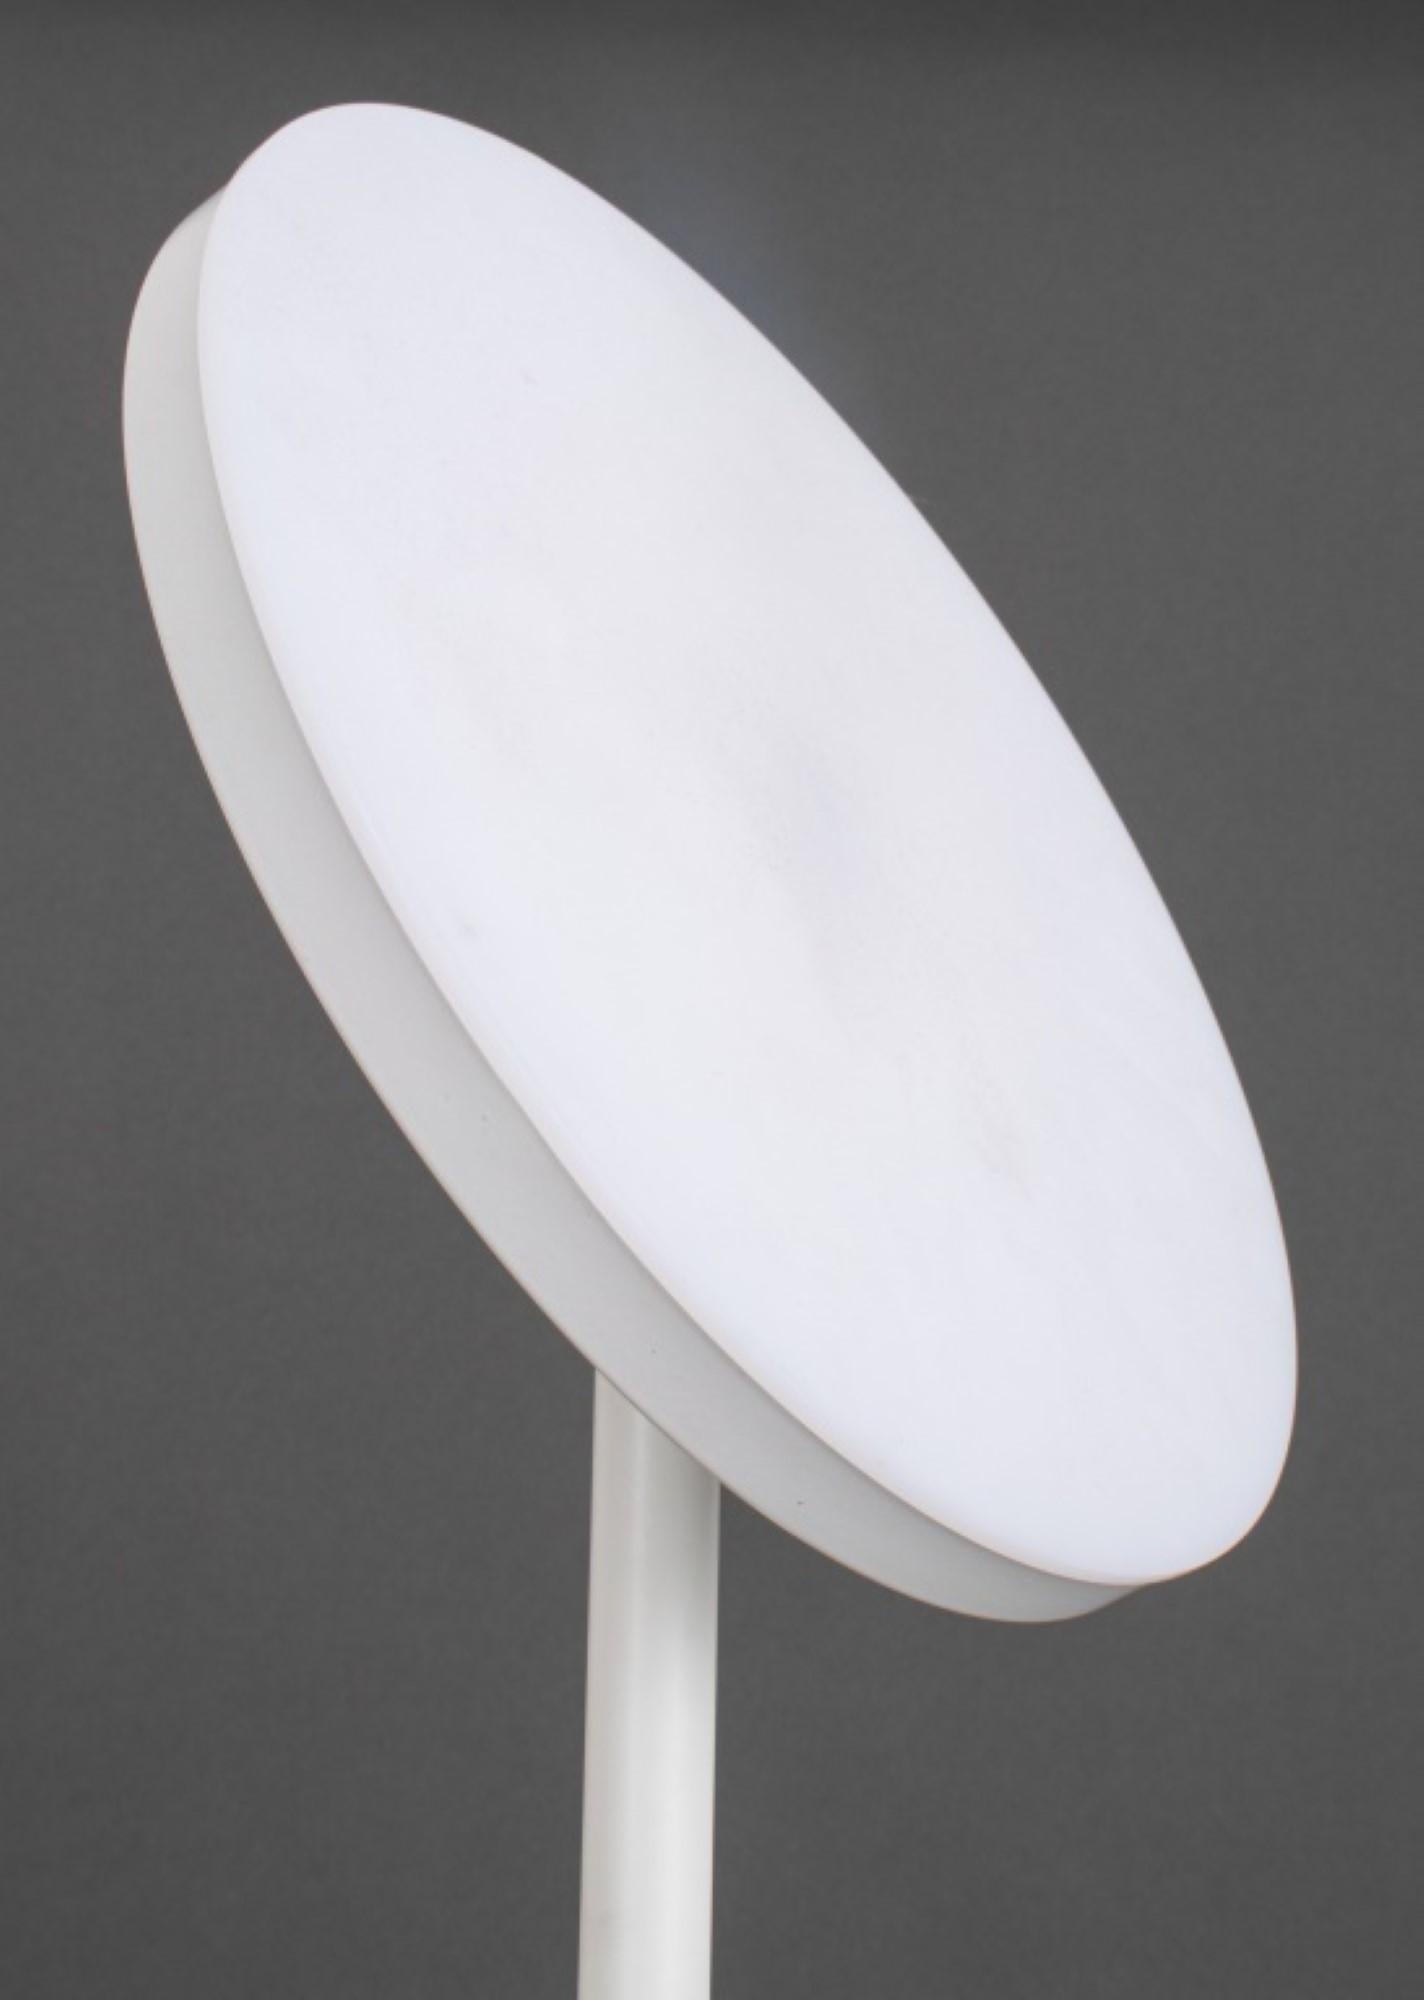 The Post-Modern LED standing floor lamp in white with an adjustable round light,

 has dimensions of 69.25